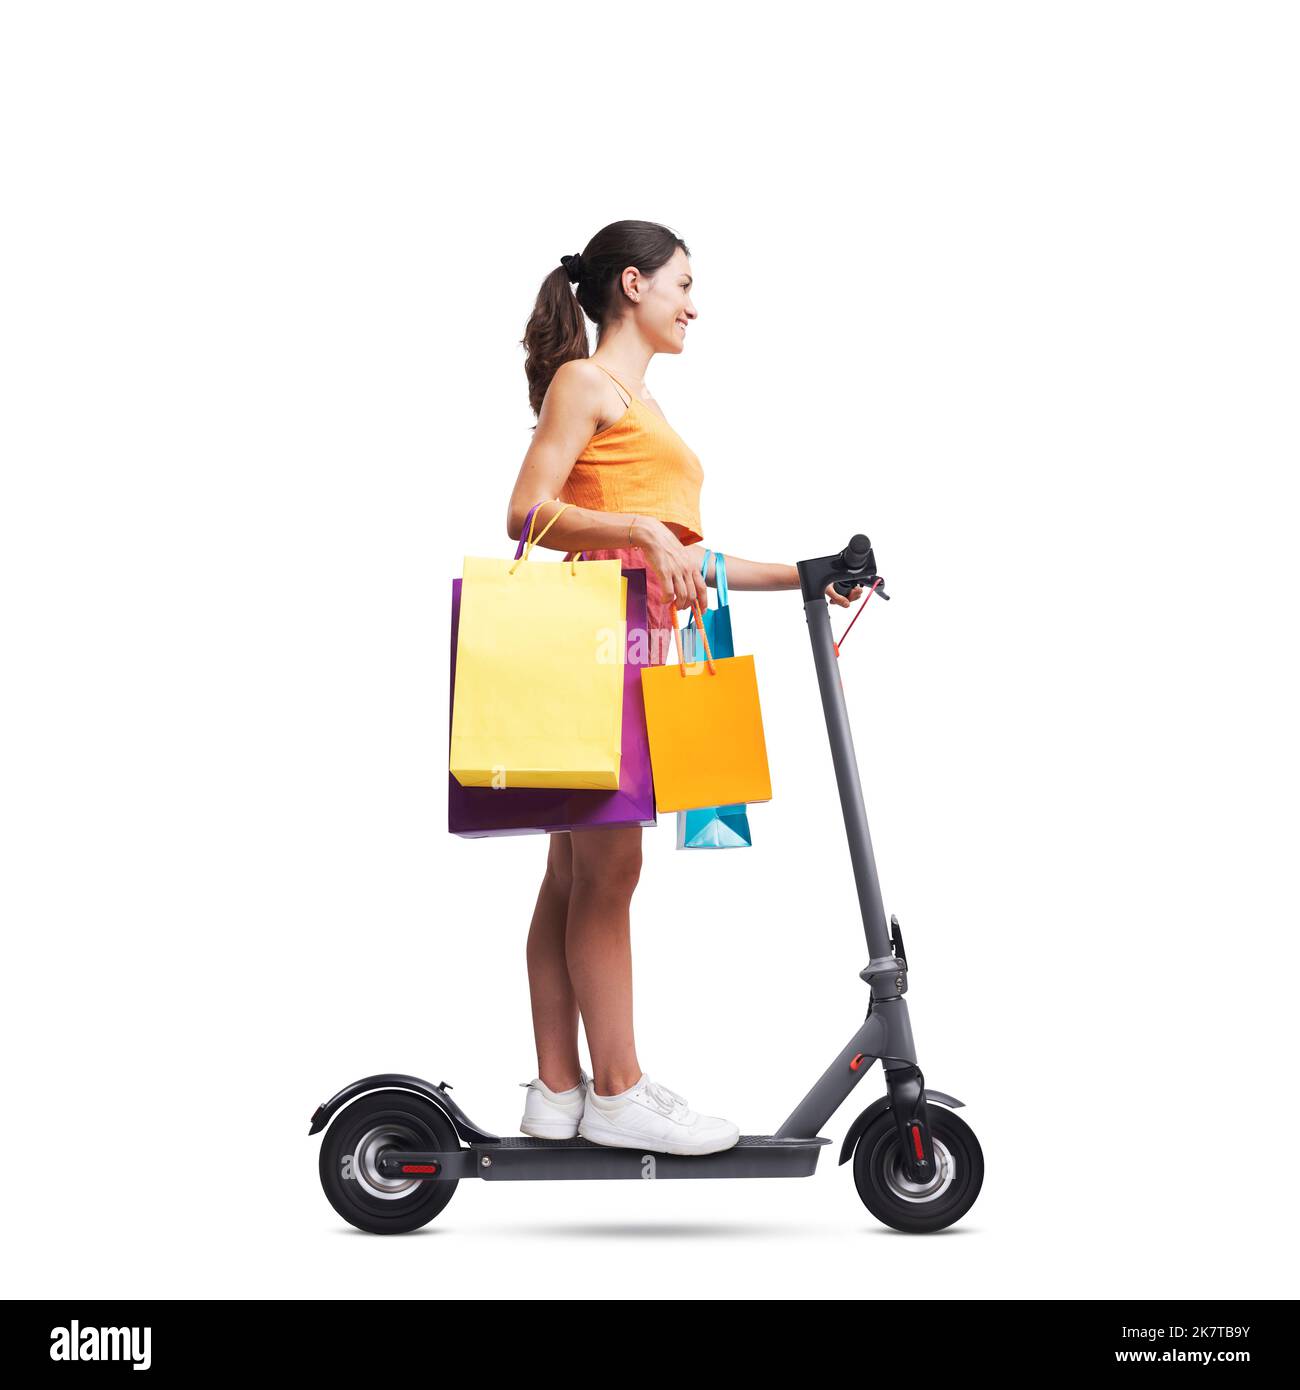 Fashionable woman holding shopping bags and riding an electric scooter, isolated on white background Stock Photo